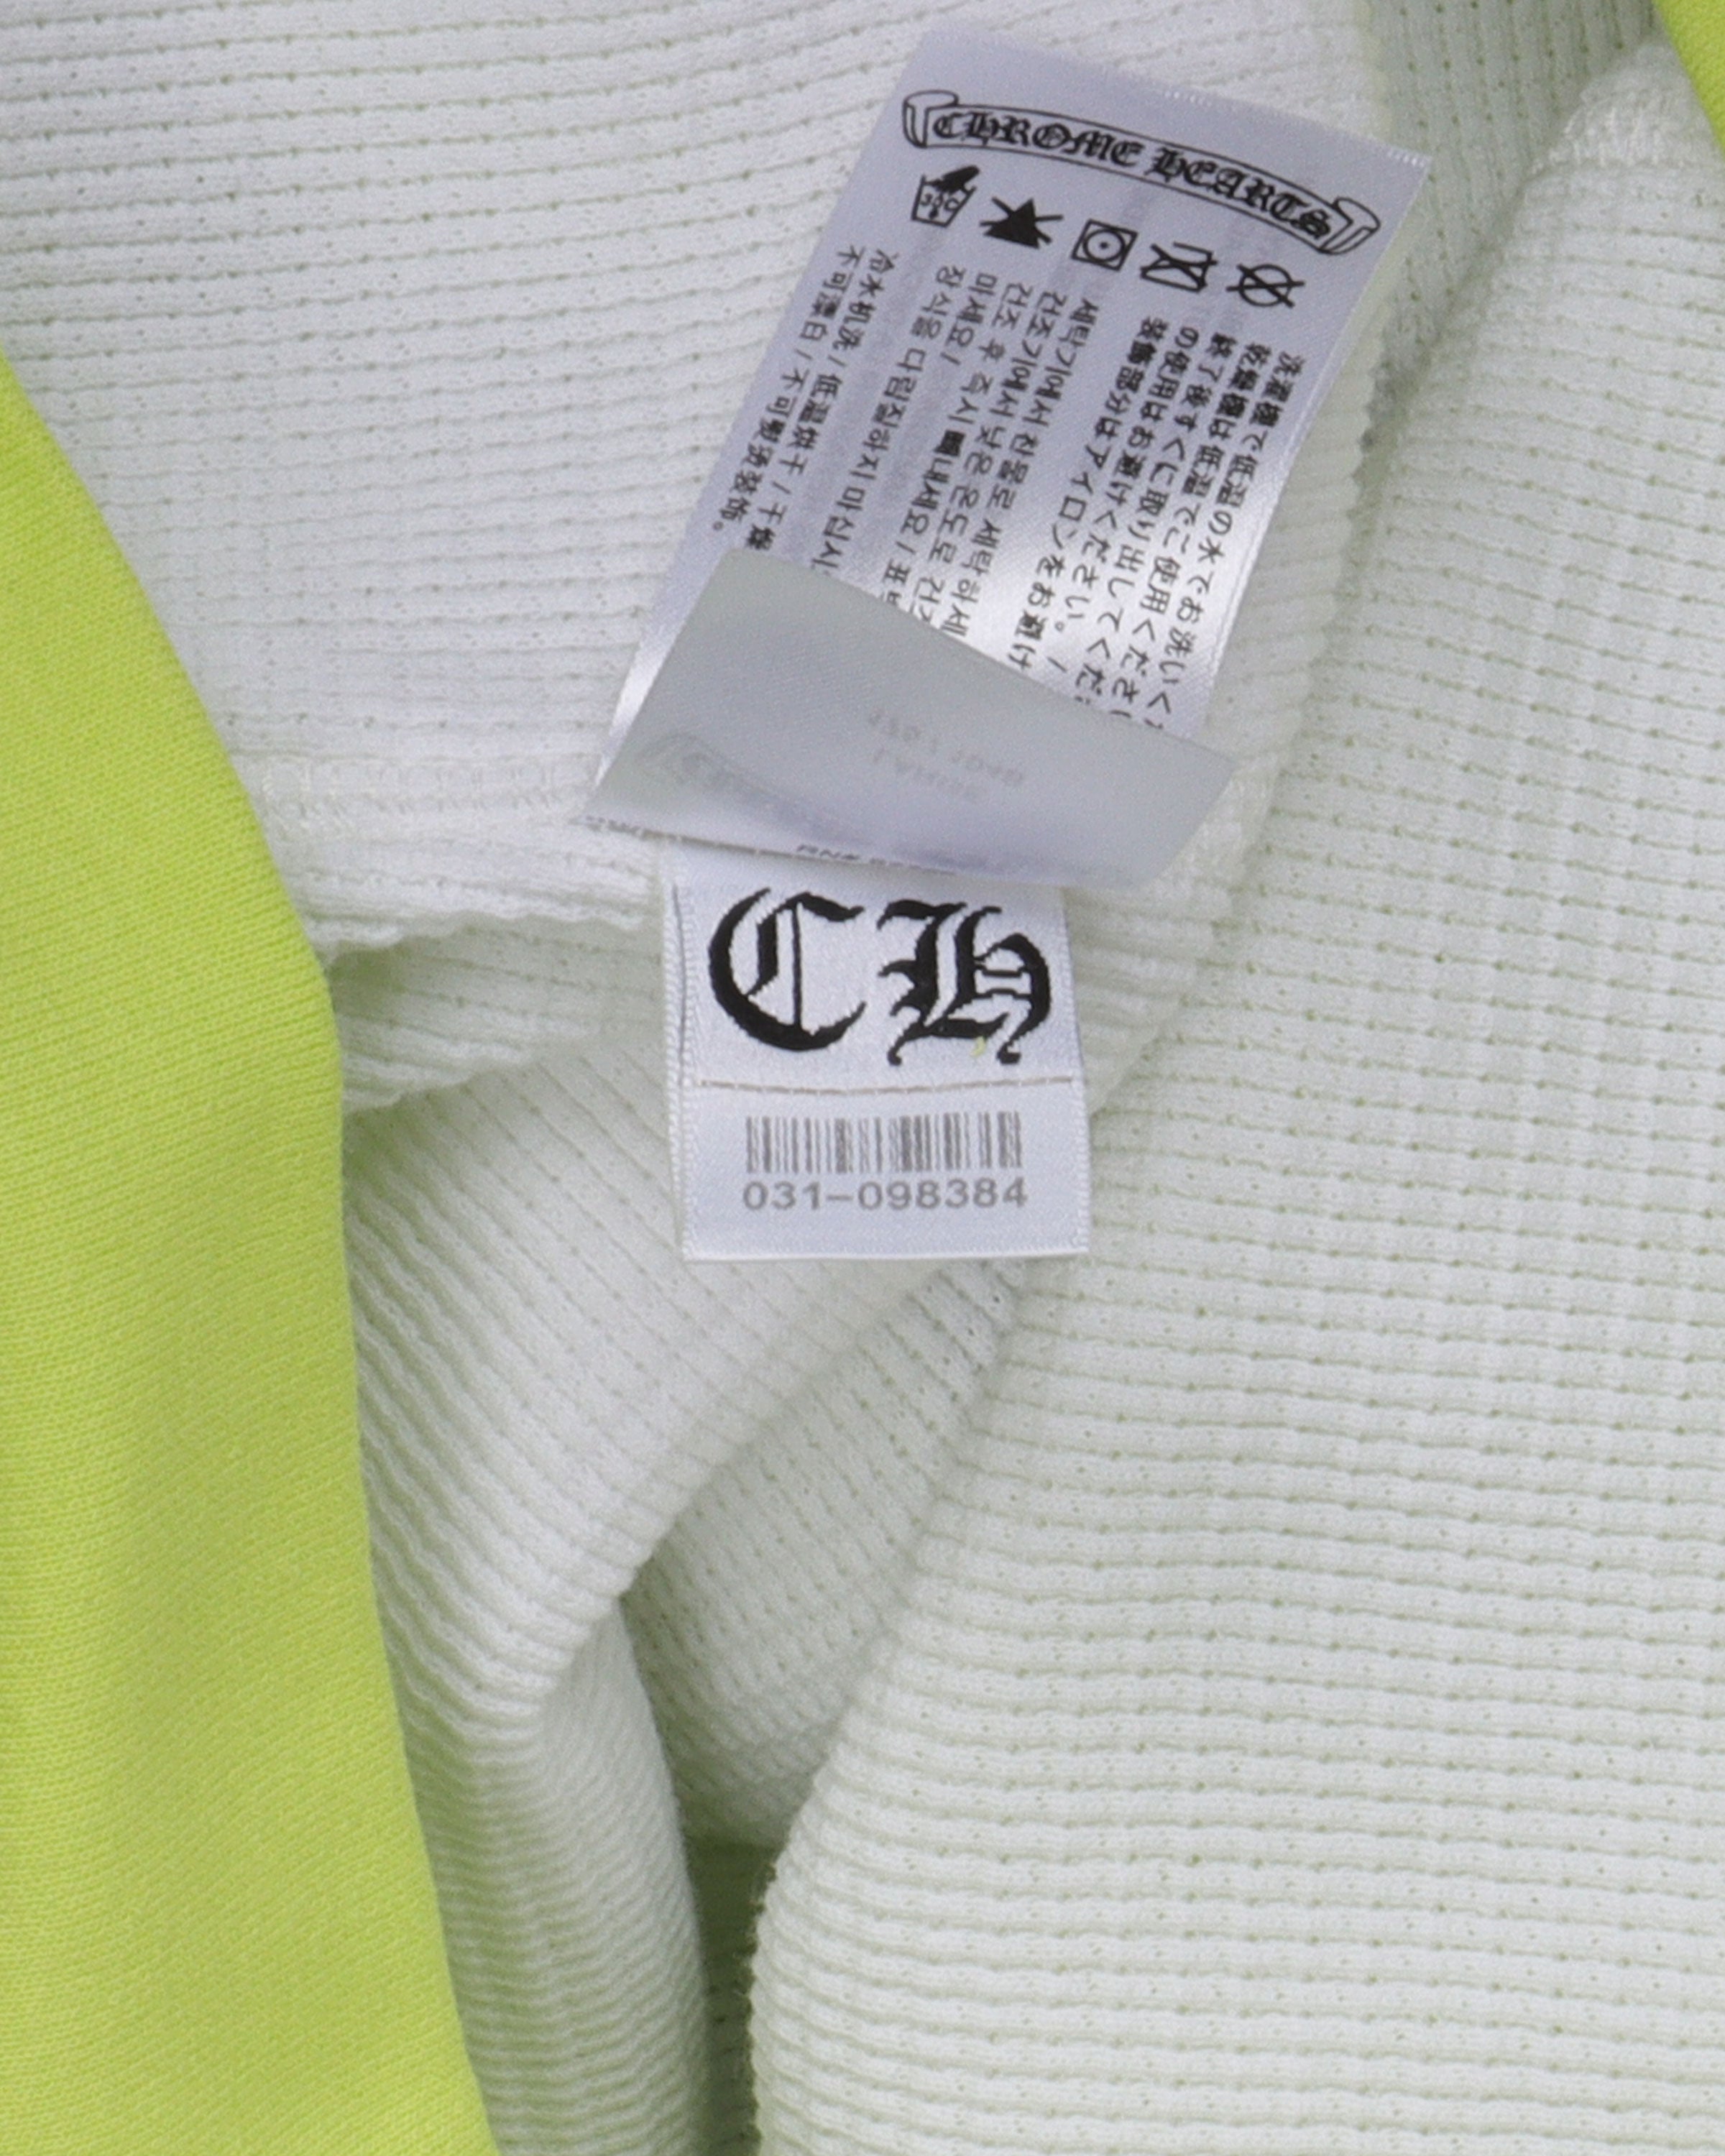 Matty Boy Thermal Lined Lime Green Zip Up Hoodie